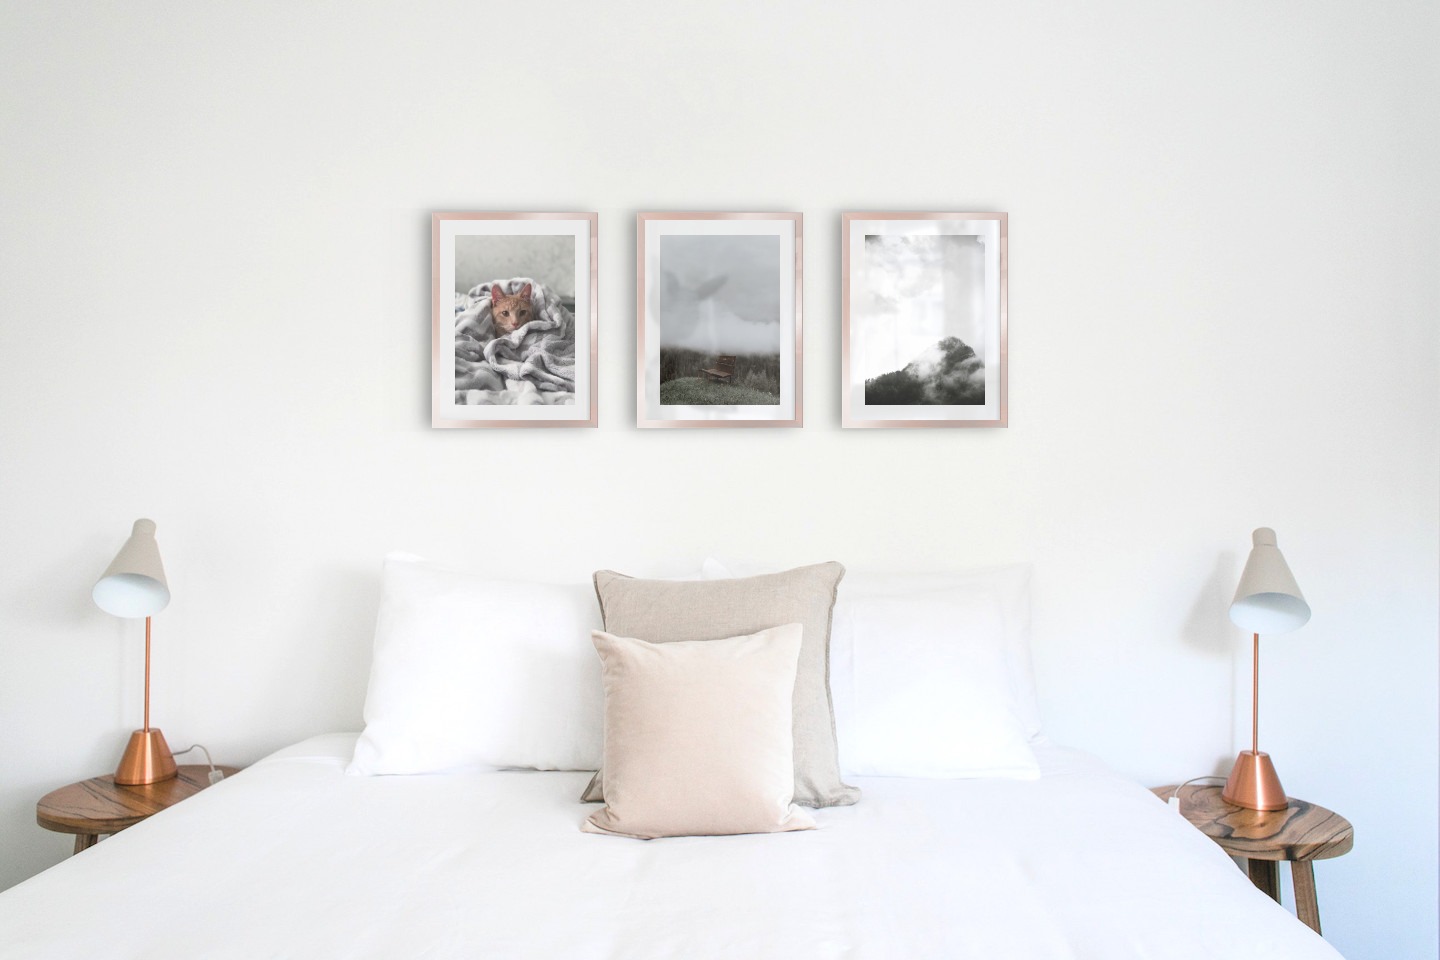 Gallery wall with picture frames in copper in sizes 30x40 with prints "Cat in felt", "Bench in misty nature" and "Trees and mountains in fog"